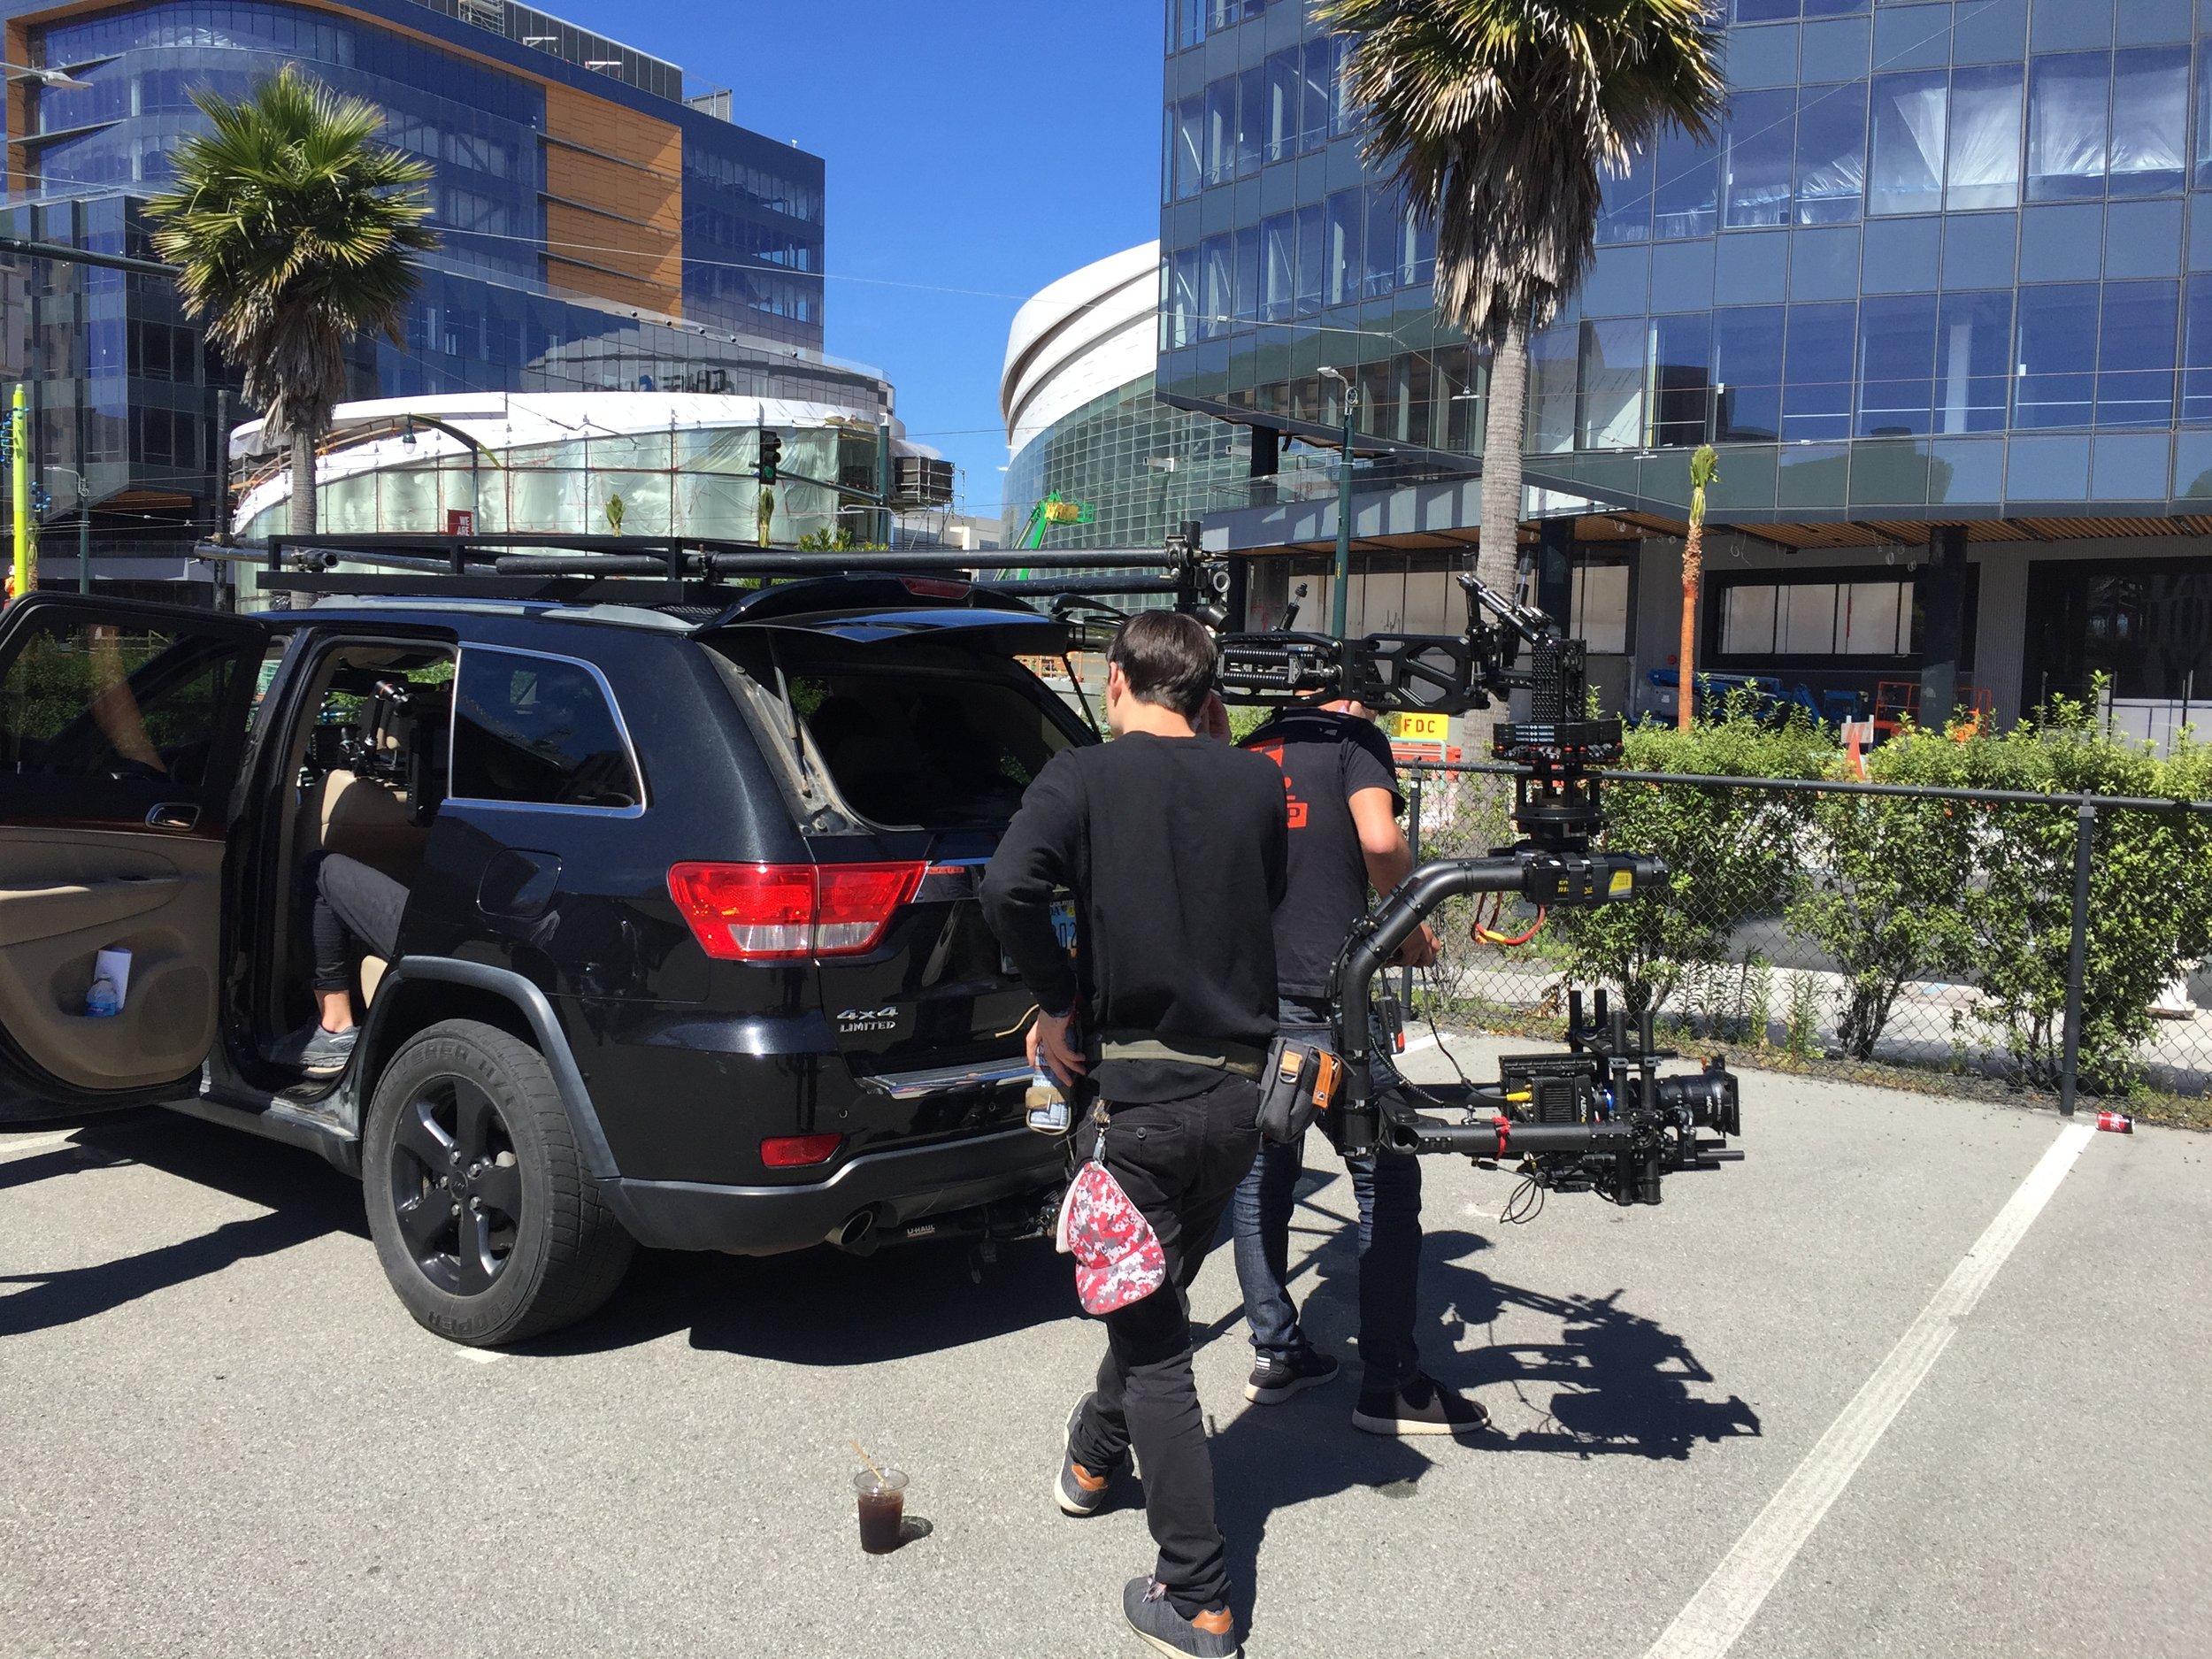 My role included protecting the camera behind the camera car as we traversed the streets of San Francisco for a KIA Niro shoot, San Francisco, 2019.